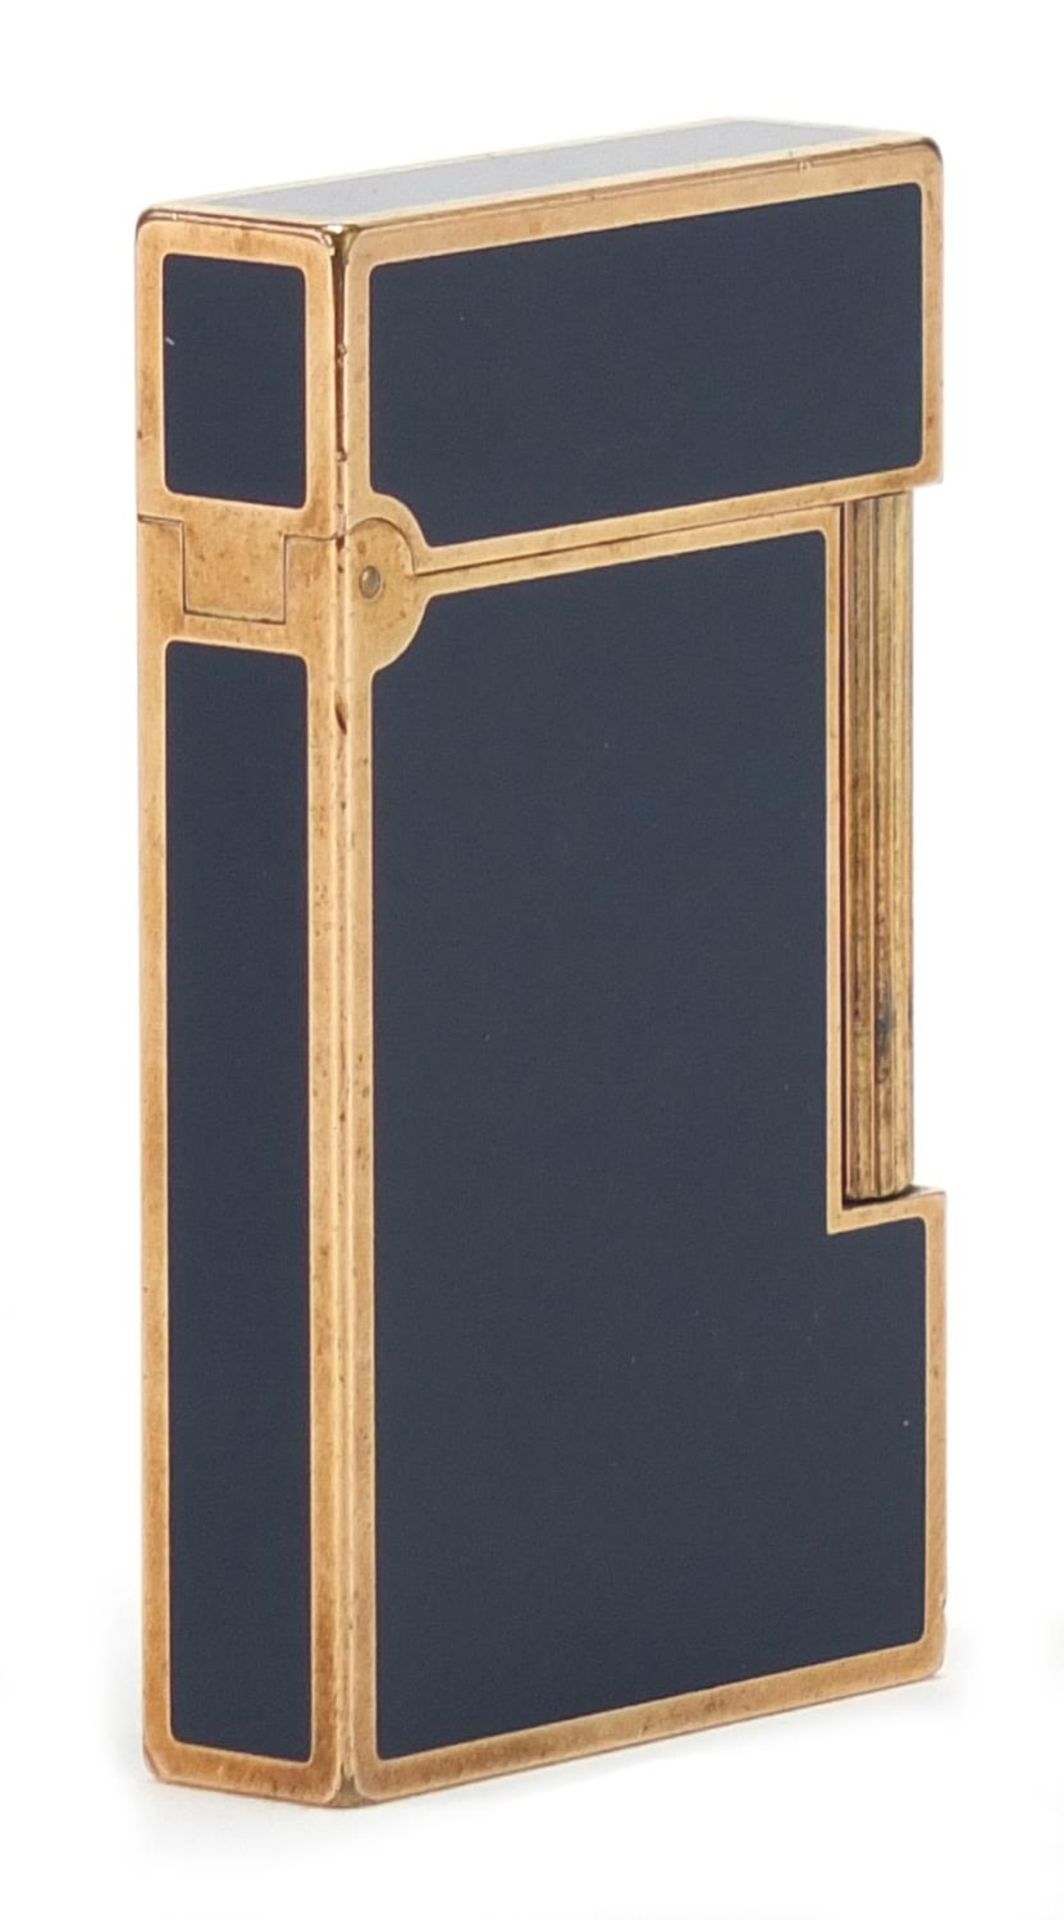 S J Dupont gold plated and blue enamel pocket lighter with certificate numbered 651010, the - Image 3 of 4